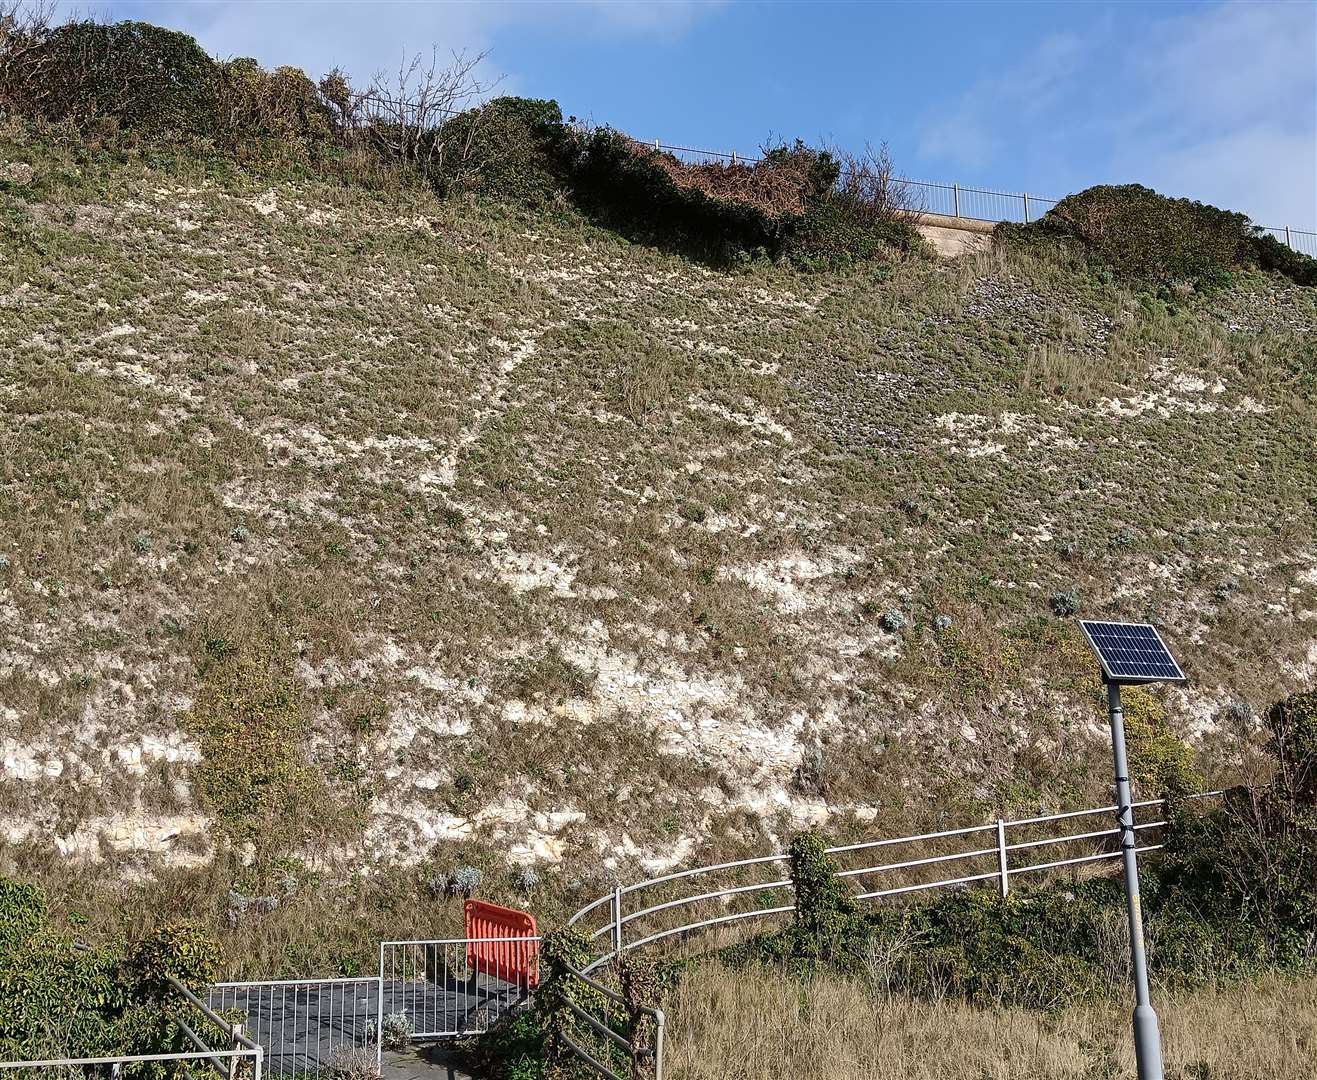 Nik Mitchell noticed the issue on West Cliff Promenade yesterday. Picture: Nik Mitchell